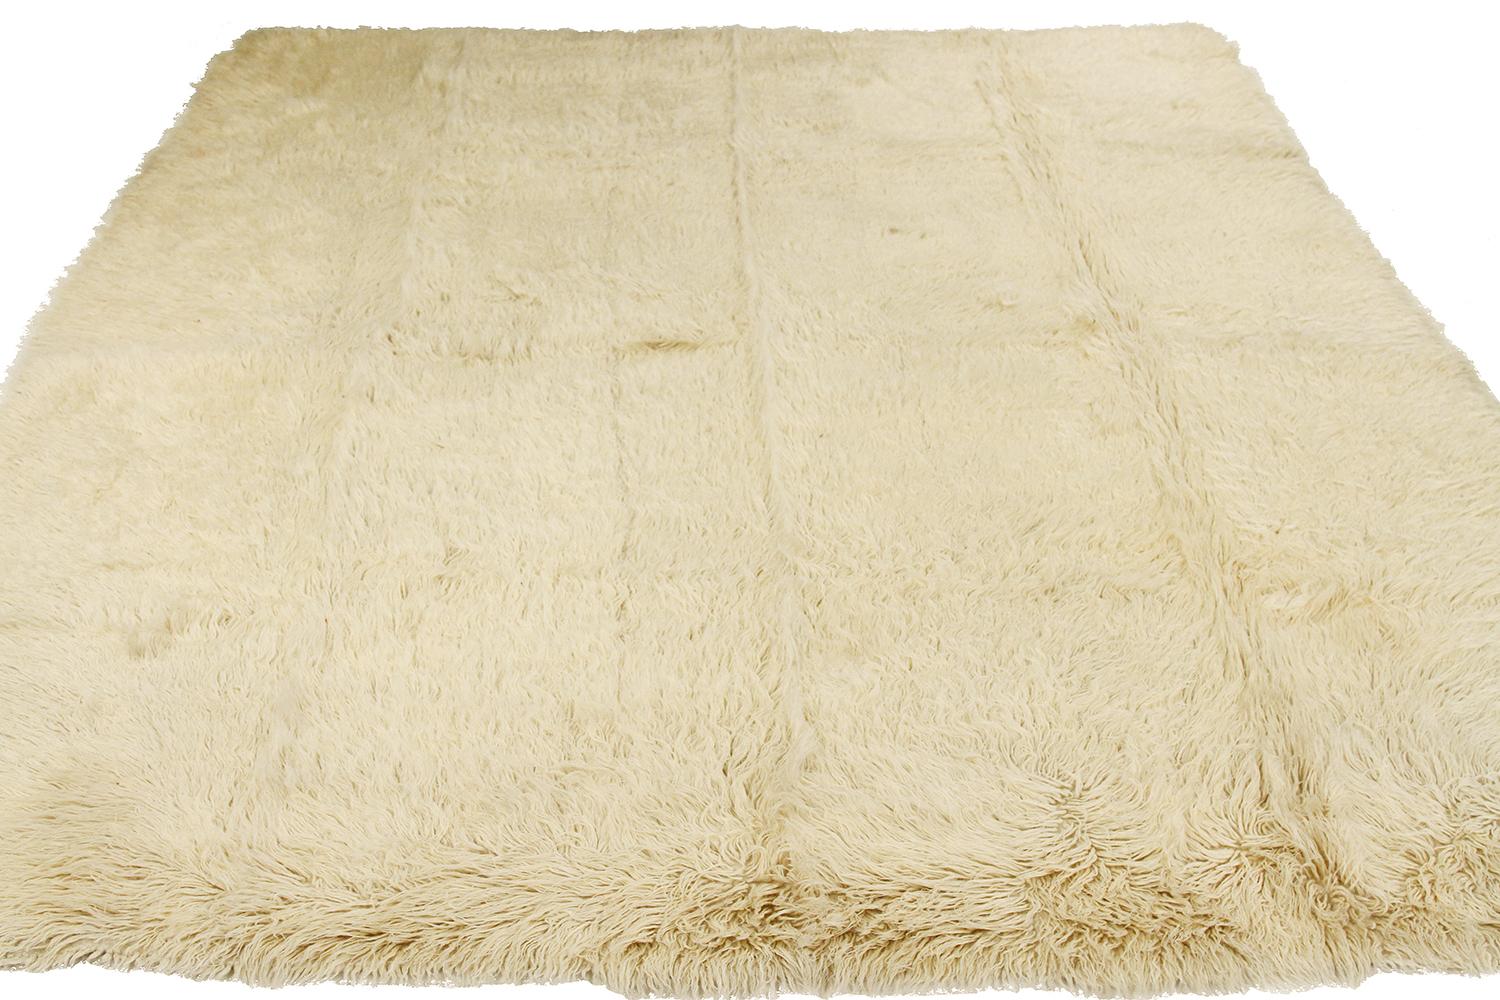 Vintage Persian rug handwoven from the finest sheep’s wool and colored with all-natural vegetable dyes that are safe for humans and pets. It’s a Kilim style design featuring an elegant and plush ivory pile. It’s a stunning piece to get for modern,